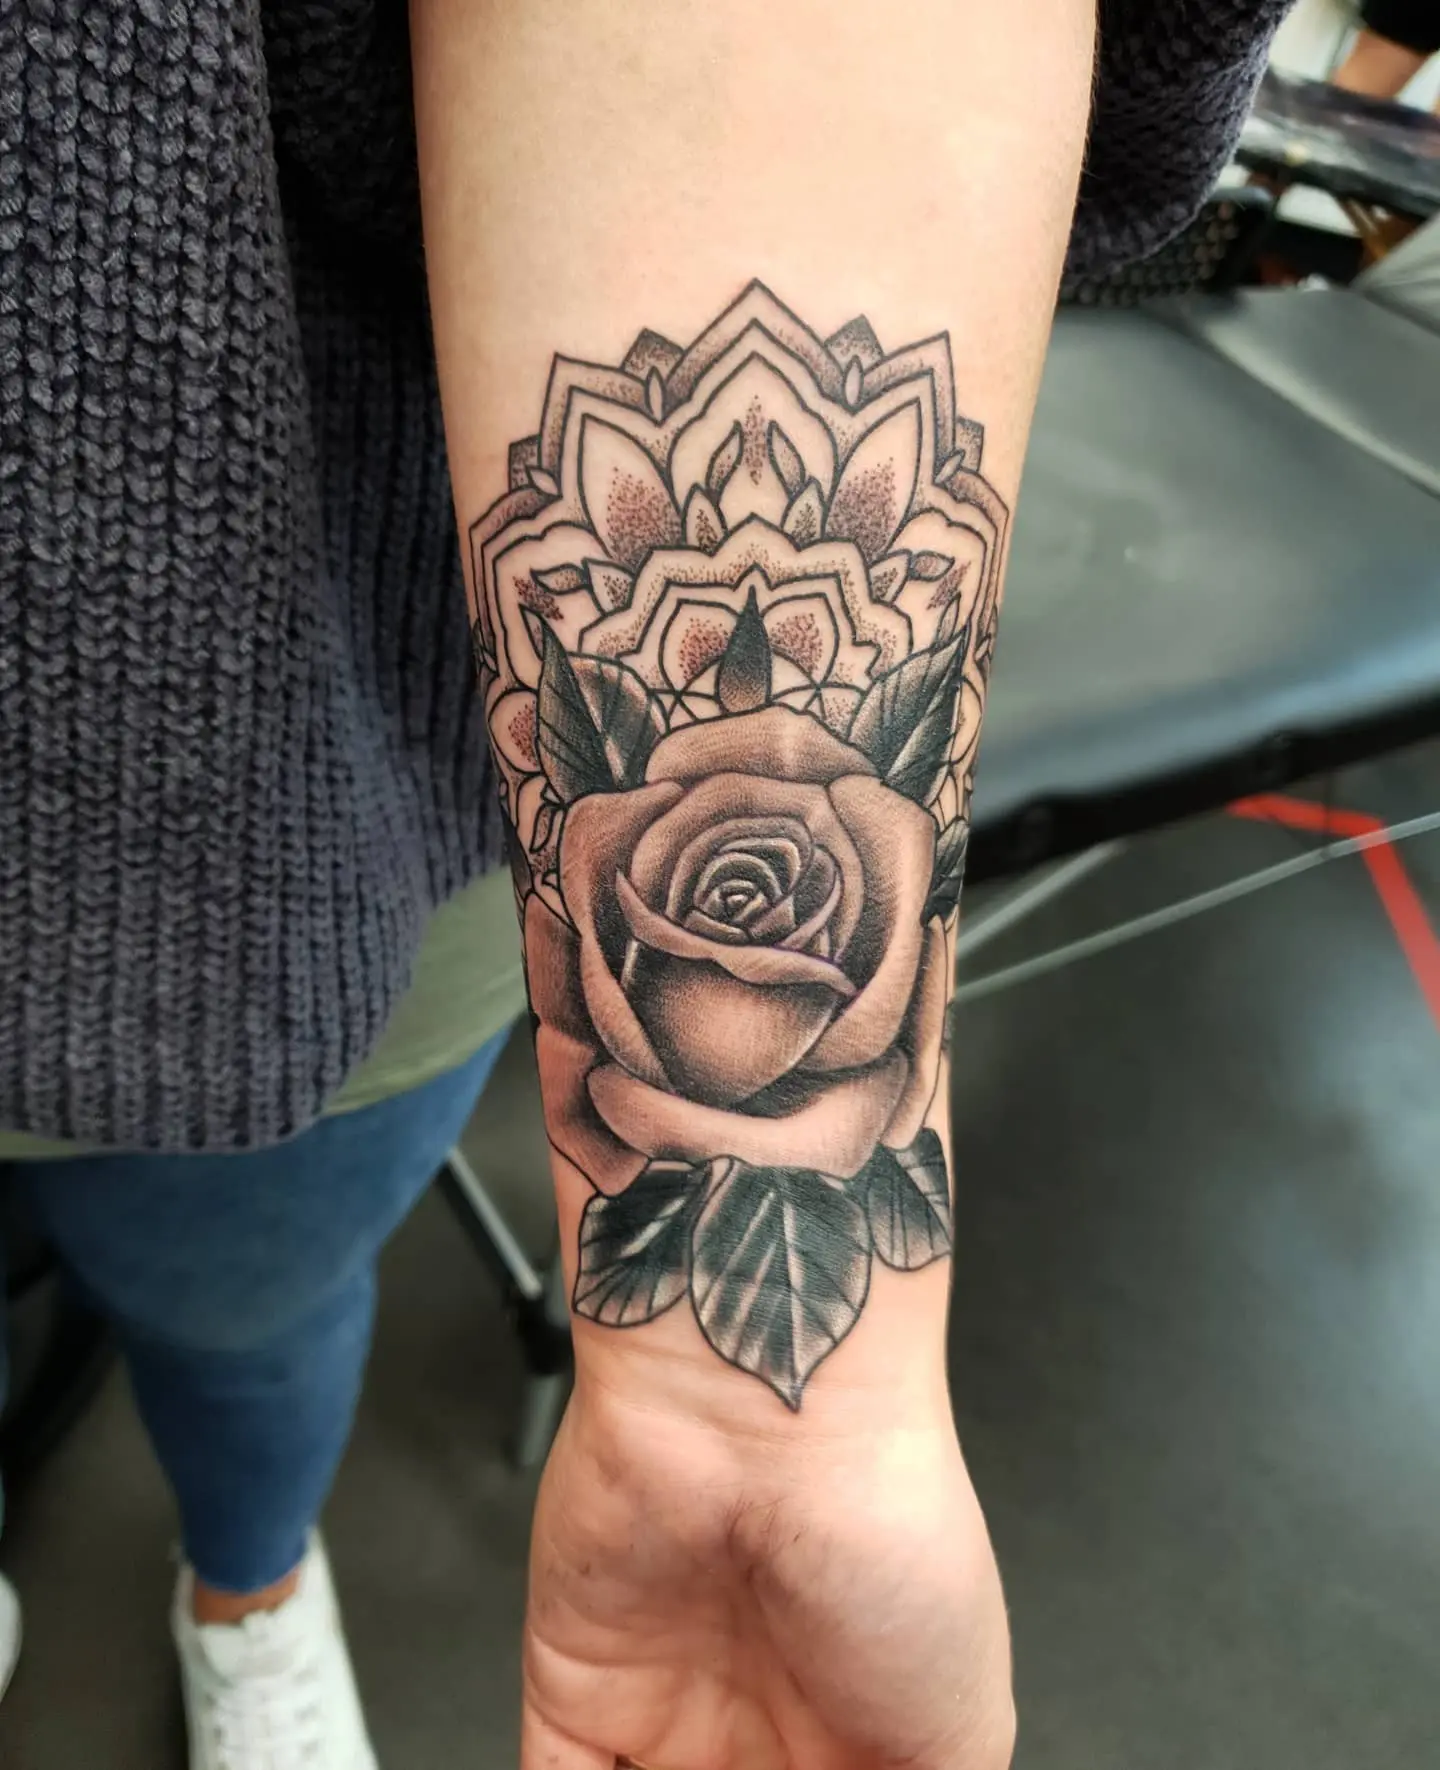 Fun name coverup from the other day- thank you Sarah! Done @studioxiiigallery
.
.
.
 coveruptattoo rosetattoo mandalatattoo mandala floraltattoo flowertattoo  ornamentaltattoo dotworktattoo dotworkmandala ornaments blackandgreytattoo tattoos coverup scottishtattooing scottishtattooer edinburgh edinburghtattooer scotland tattoosbyalanross alrosstattoo studioxiiigallery studioxiii